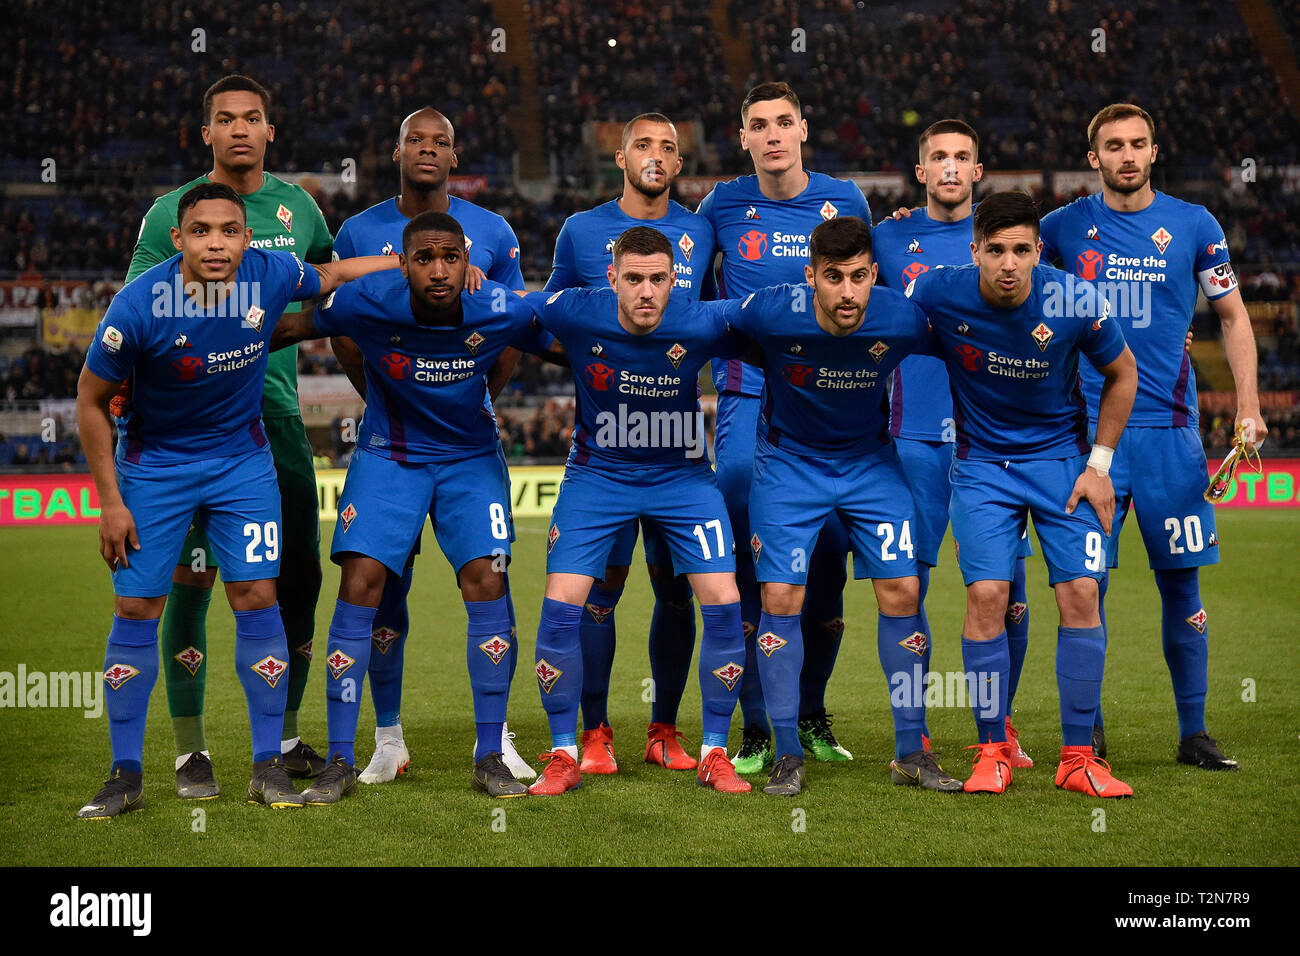 Rome, Italy. 3rd Apr, 2019. Fiorentina team shot during the Serie A match between AS Roma and ACF Fiorentina at Stadio Olimpico, Rome, Italy on 3 April 2019. Photo by Giuseppe Maffia. Credit: UK Sports Pics Ltd/Alamy Live News Stock Photo